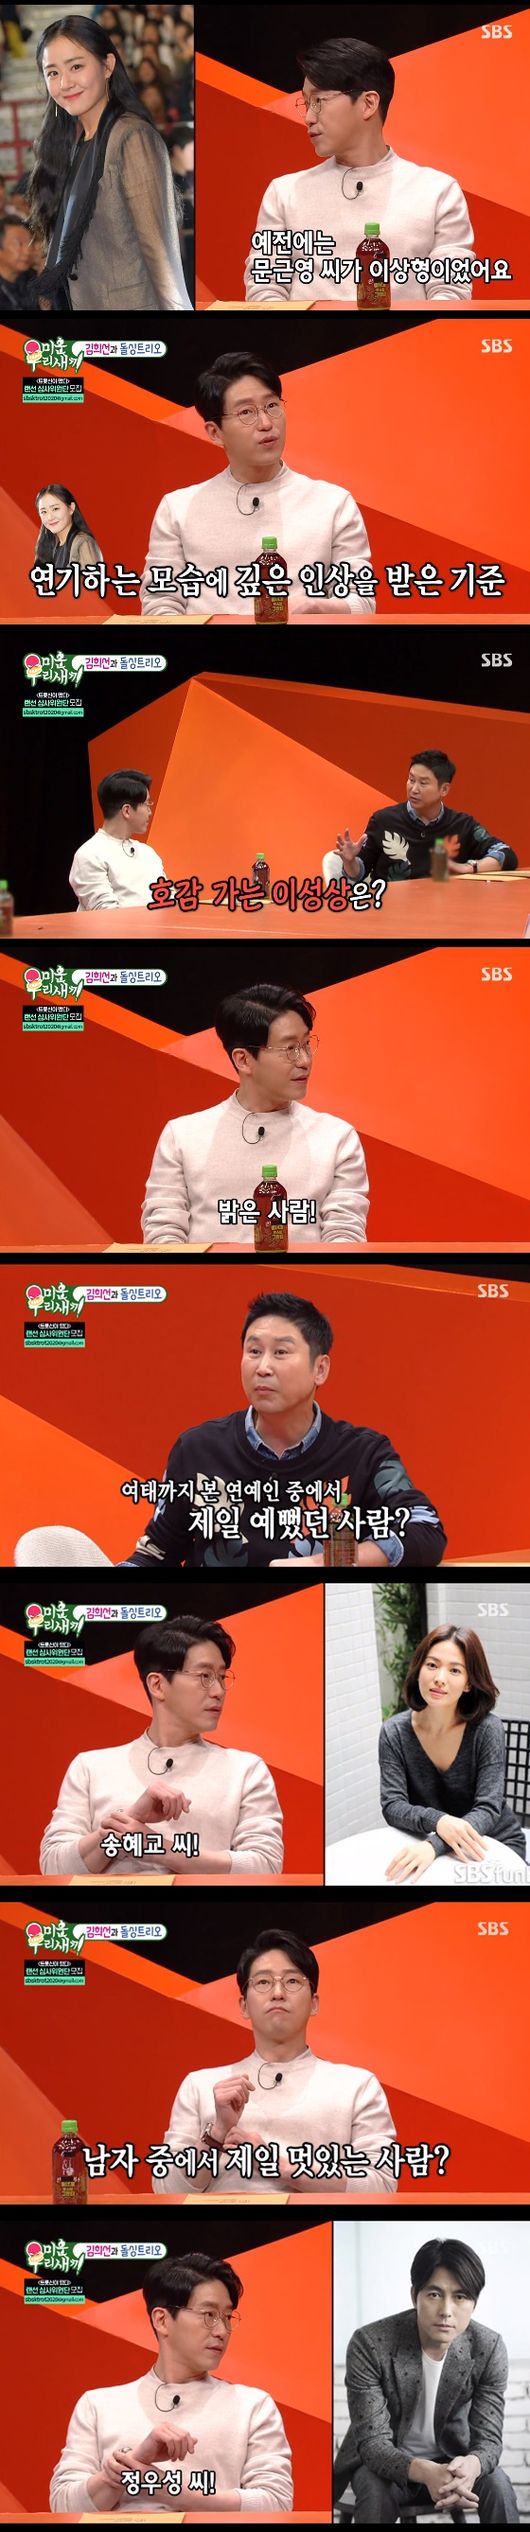 Um Ki-joon mentioned Song Hye-kyoIn SBS entertainment My Little Old Boy broadcasted on the 11th, Um Ki-joon was shown as the most beautiful actor and Song Hye-kyo was selected.Um Ki-joon, who appeared as a guest on the day, replied, It seems that it is harder for the general public to be more difficult than the villain and to give a smile.Seo Jang-hoon asked, Dont you appear in the monthly drama Penthouse? Um Ki-joon said, In the early stages of the play, a murder of question occurs.It is a drama about desire and revenge. Shin Dong-yup told Um Ki-joon: Its a perfect My Little Old Boy.What do your parents say? And Um Ki-joon replied, You are miserable and you do not do much anymore. I want to make a family about 50 years ago.I think the older I get, the more difficult my eyes are. Seo Jang-hoon replied, Umme Fattal is a nickname ... What do you think of the deadly charm you think? Um Ki-joon replied, I do not know.In the past, Moon Geun-young was the ideal type - now a bright person, he replied.Seo Jang-hoon said, I heard that my mother was crying when I talked about her. My mother appeared surprised at the 20th anniversary of her debut, but she was tearful.So Seo Jang-hoon said mother and Shin Dong-yup laughed at the pinch saying what are you doing now?After that, Seo Jang-hoon said he had made a bar at home, and when his friends asked if he would come often, he replied, It comes often.Then, he said that he would raise three turtles, Turtles, and Kobuk, and Shin Dong-yup and Seo Jang-hoon said that the Turtles have a life span of 70 years.There will be no pain in parting, he said, surprised.Shin Dong-yup asked, Who was the most beautiful actor? Um Ki-joon was embarrassed and replied, Song Hye-kyo and the most wonderful male actor was Jung Woo-sung.Shin Dong-yup added, I saw Jung Woo-sung, a high school student, and it was really cool that it was not like high school student.Also, when asked about his ideal type, Um Ki-joon said, It used to be Mr. Moon Geun-young, who was against the way he acted and is now a bright person.broadcast screen capture